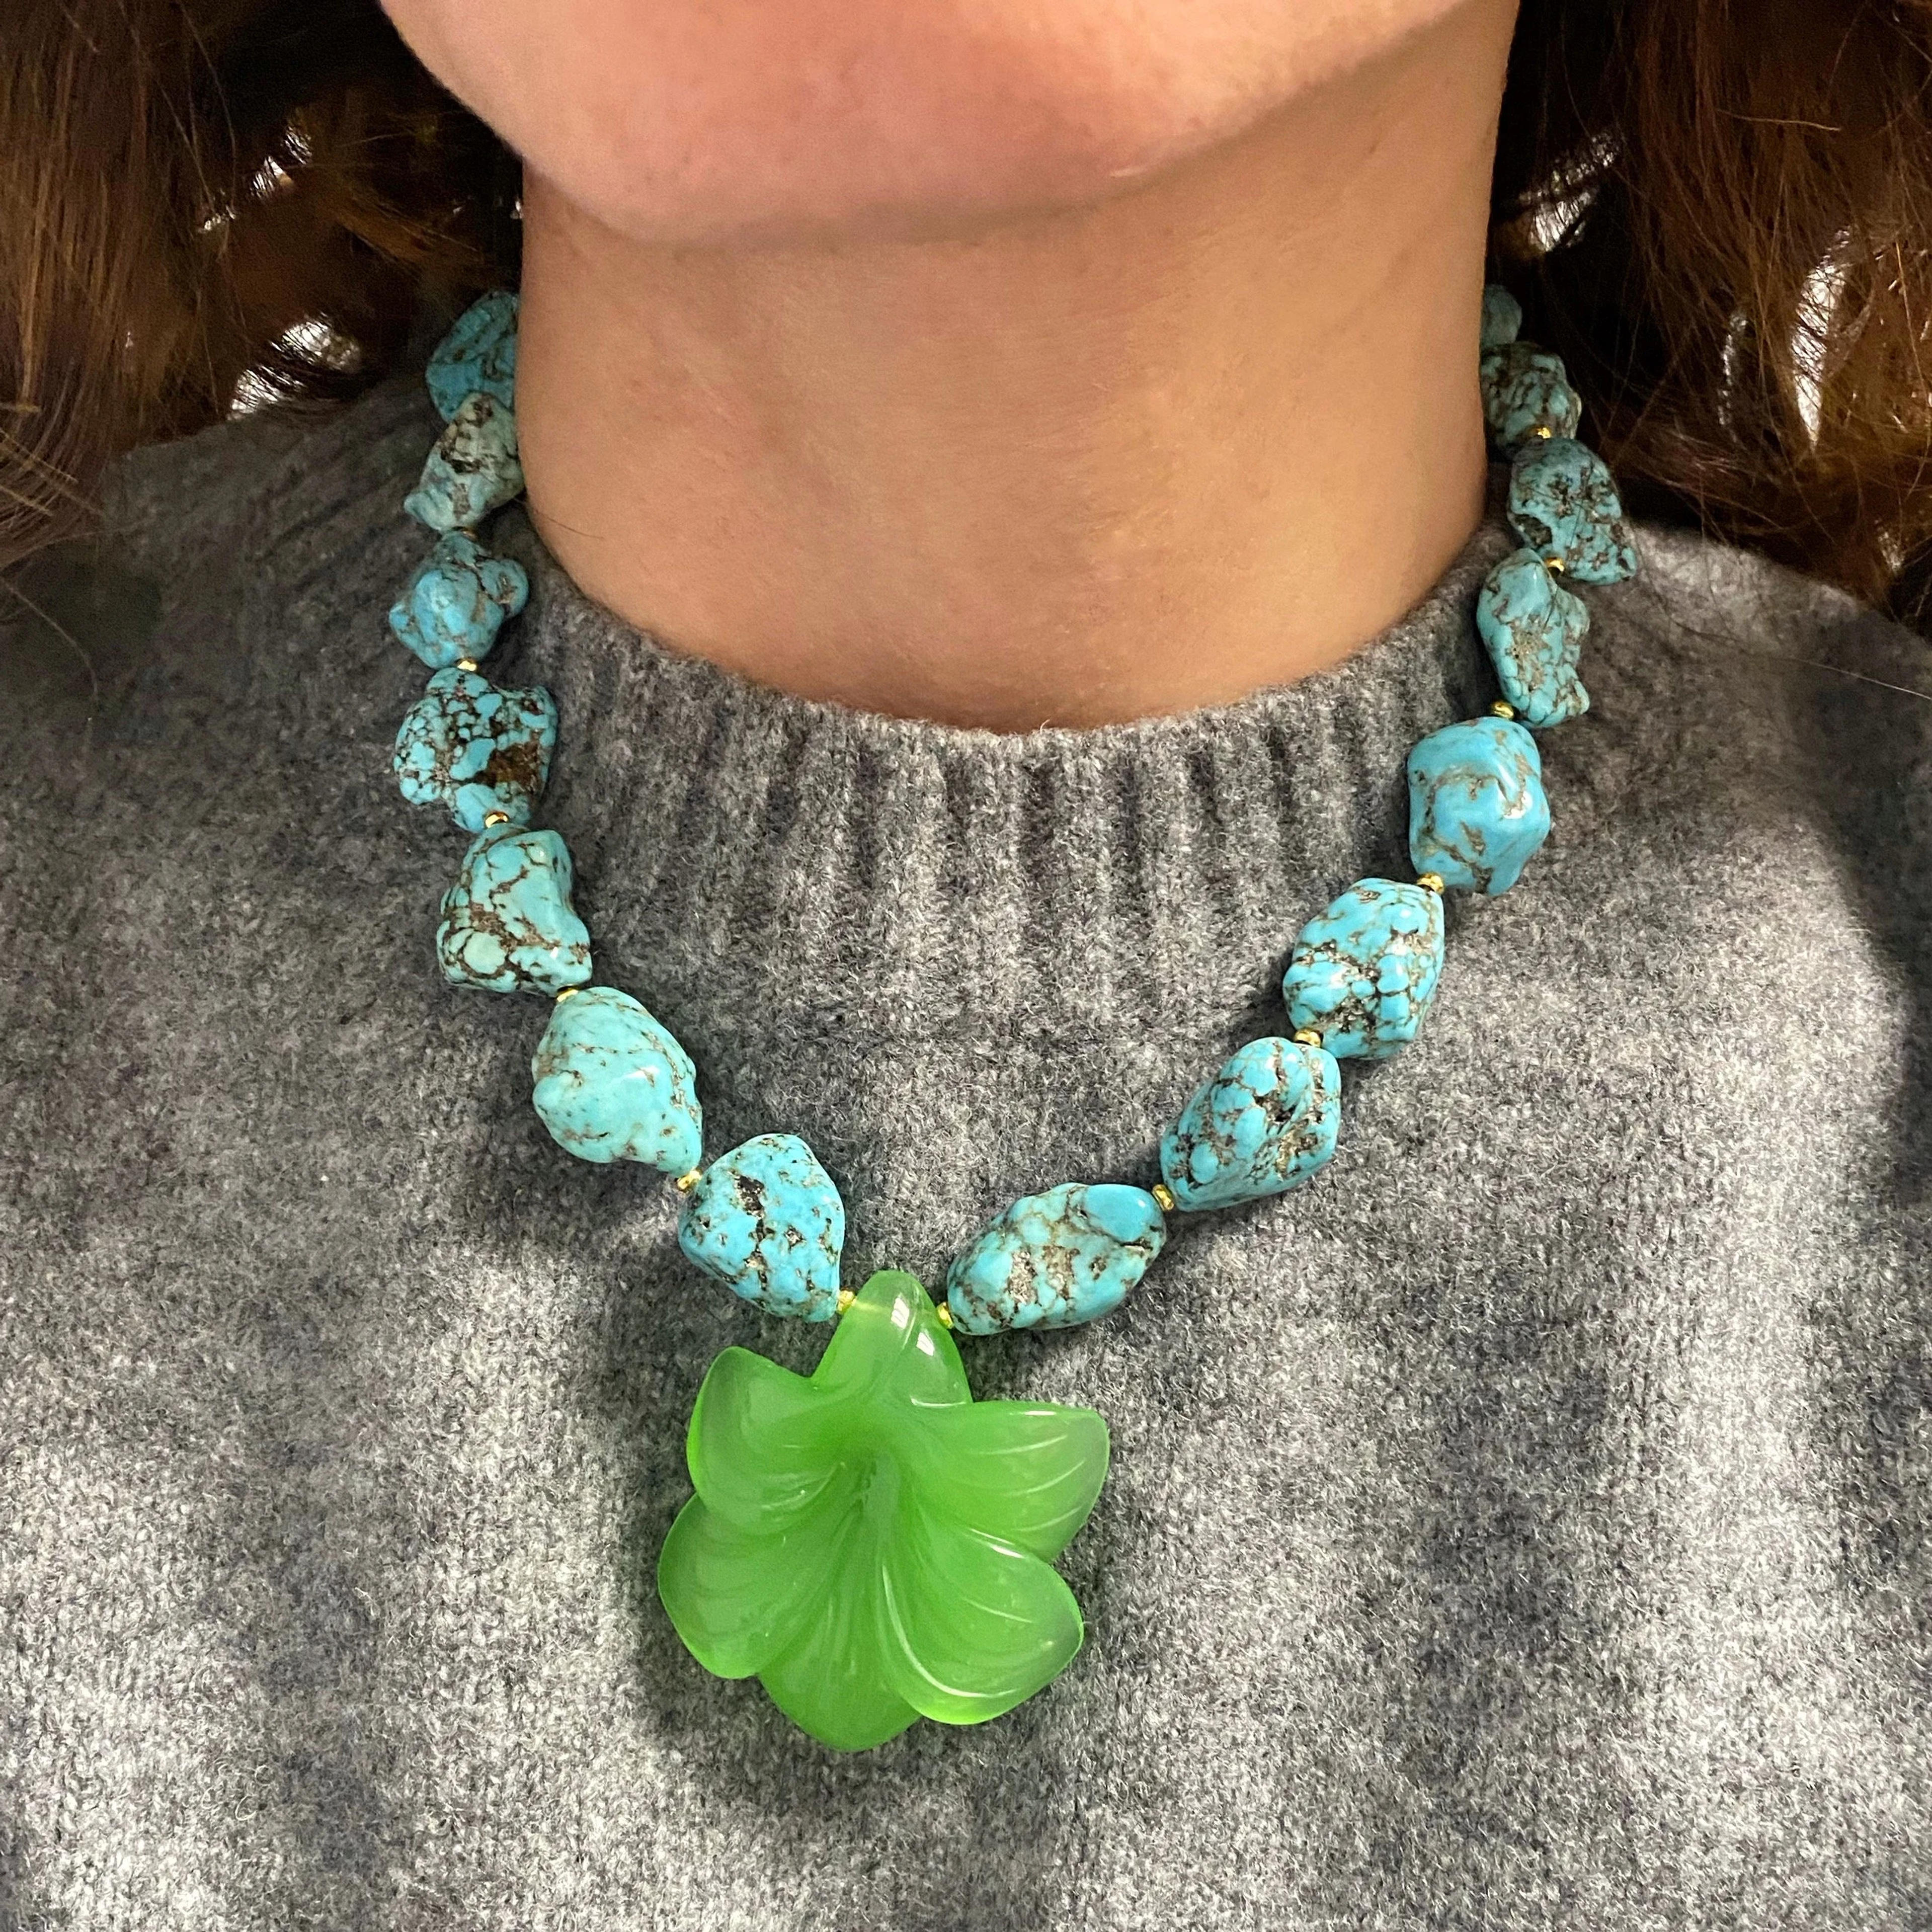 Turquoise Color Necklace, Howlite Stones Necklace, Blue Green Necklace, Green Flower Pendant Necklace, Colorful Necklace, Summer Jewelry - Etsy